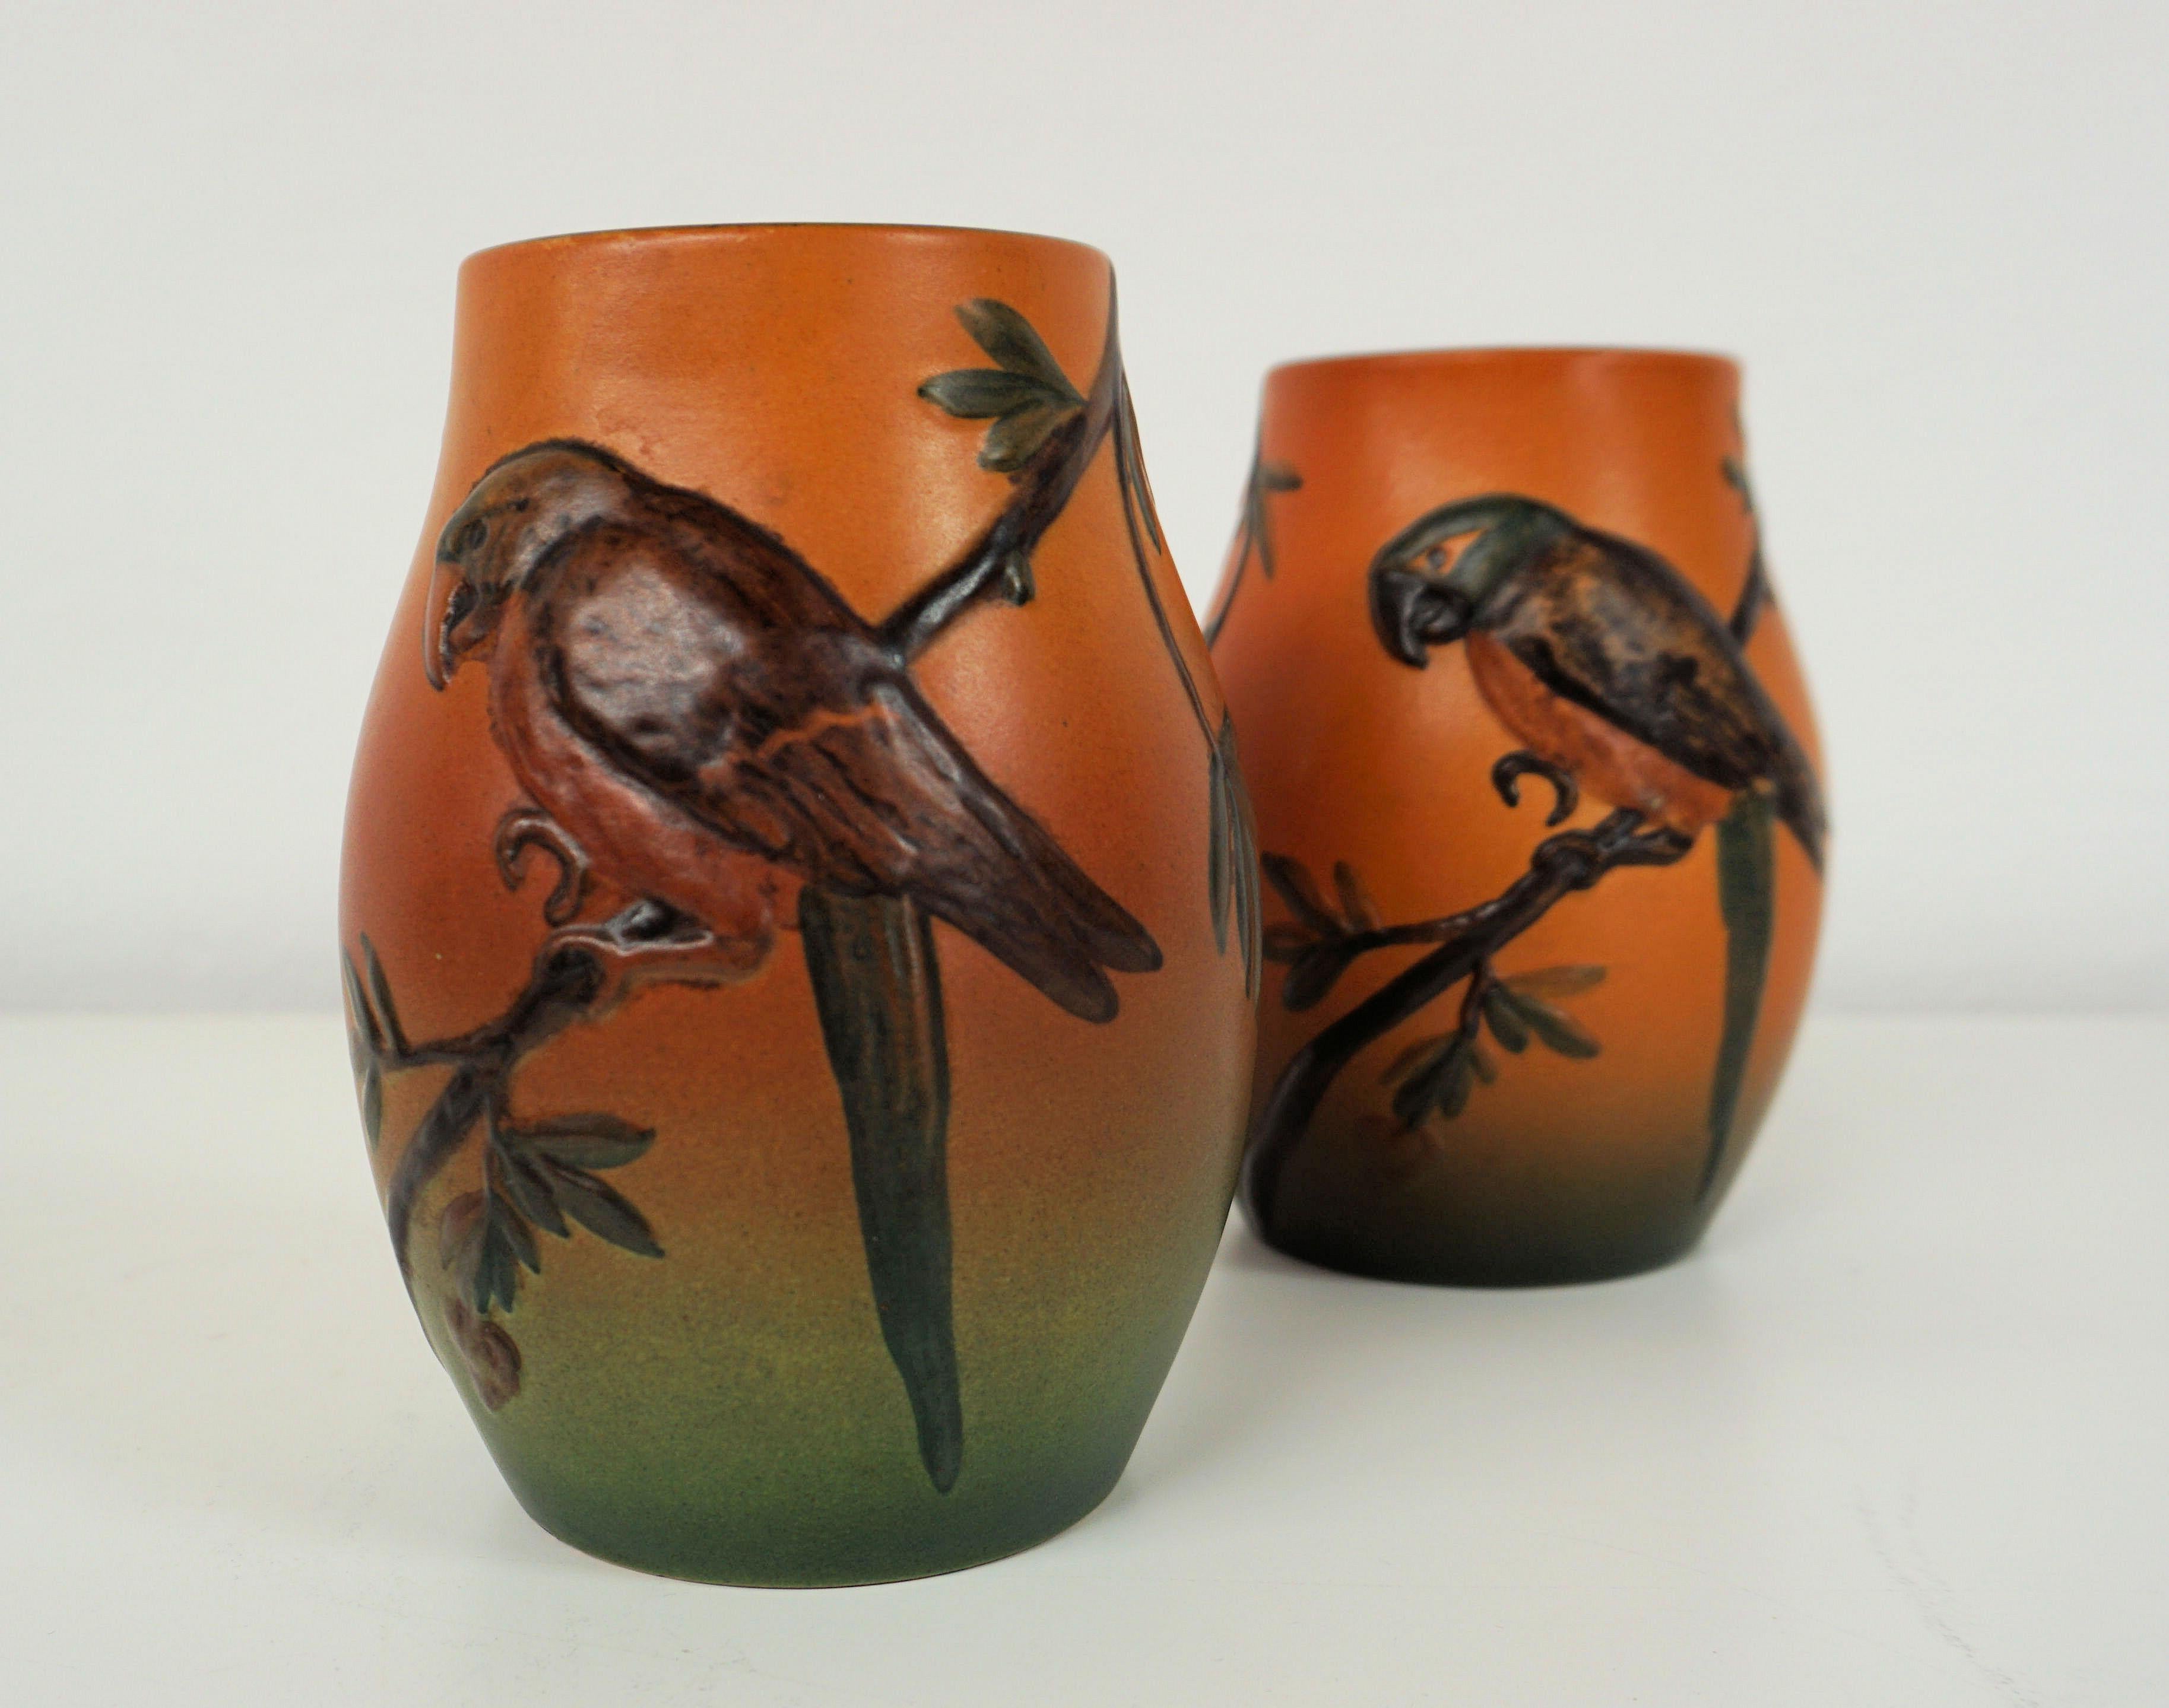 Hand-Crafted 1920s Handcrafted Danish Art Nouveau Parrot Decorated Vases by P. Ipsens Enke